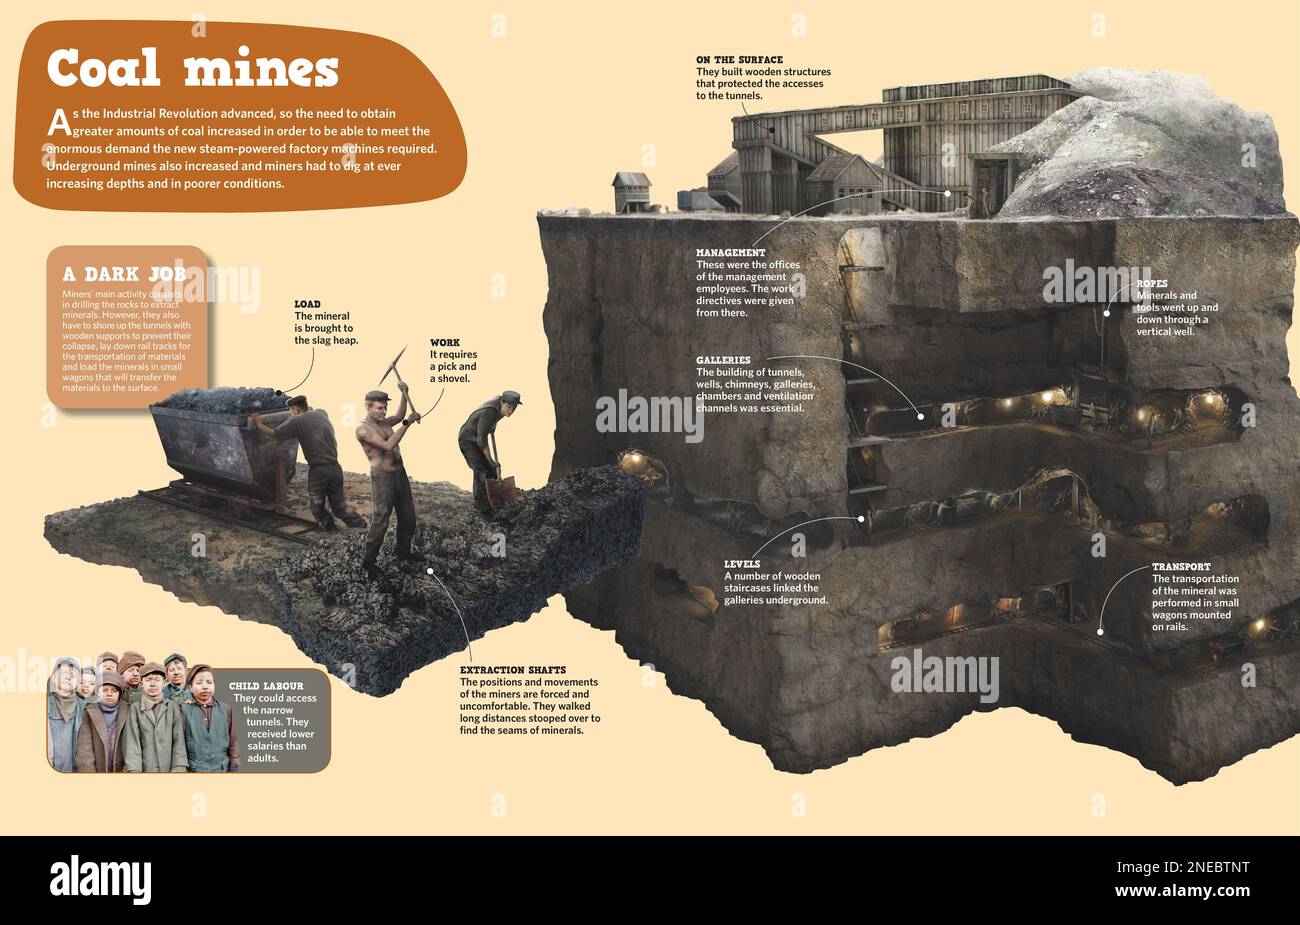 Infographic on coal mines which, during the Industrial Revolution, had to increase production in order to meet demand, which increasingly grew. [Adobe InDesign (.indd); 4960x3188]. Stock Photo